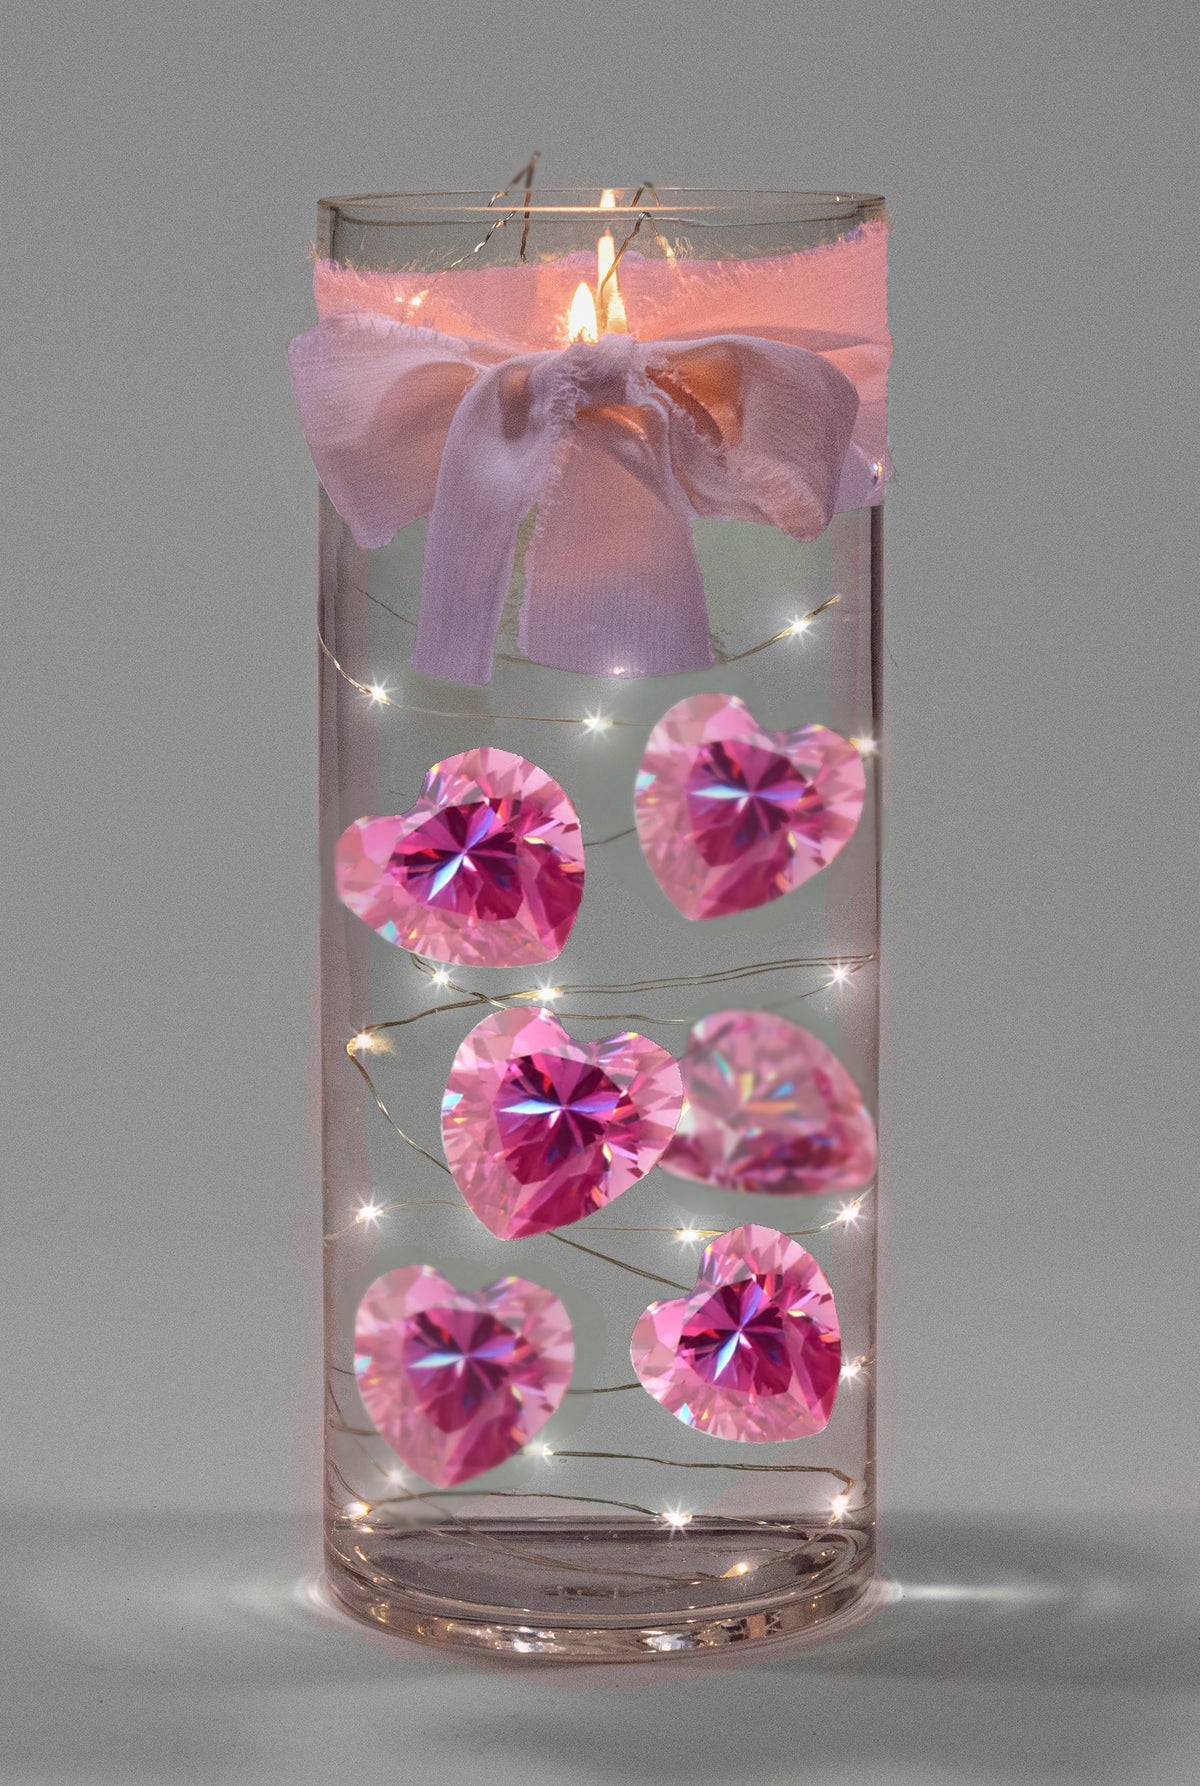 Floating Blush Pink Hearts - 1.75"ea -  1 Pk Fill 1 Gallon of Transparent Gels for the Floating Effects-With Measured Gels Prep Bag-With Option of 3 Submersible Fairy Lights Strings